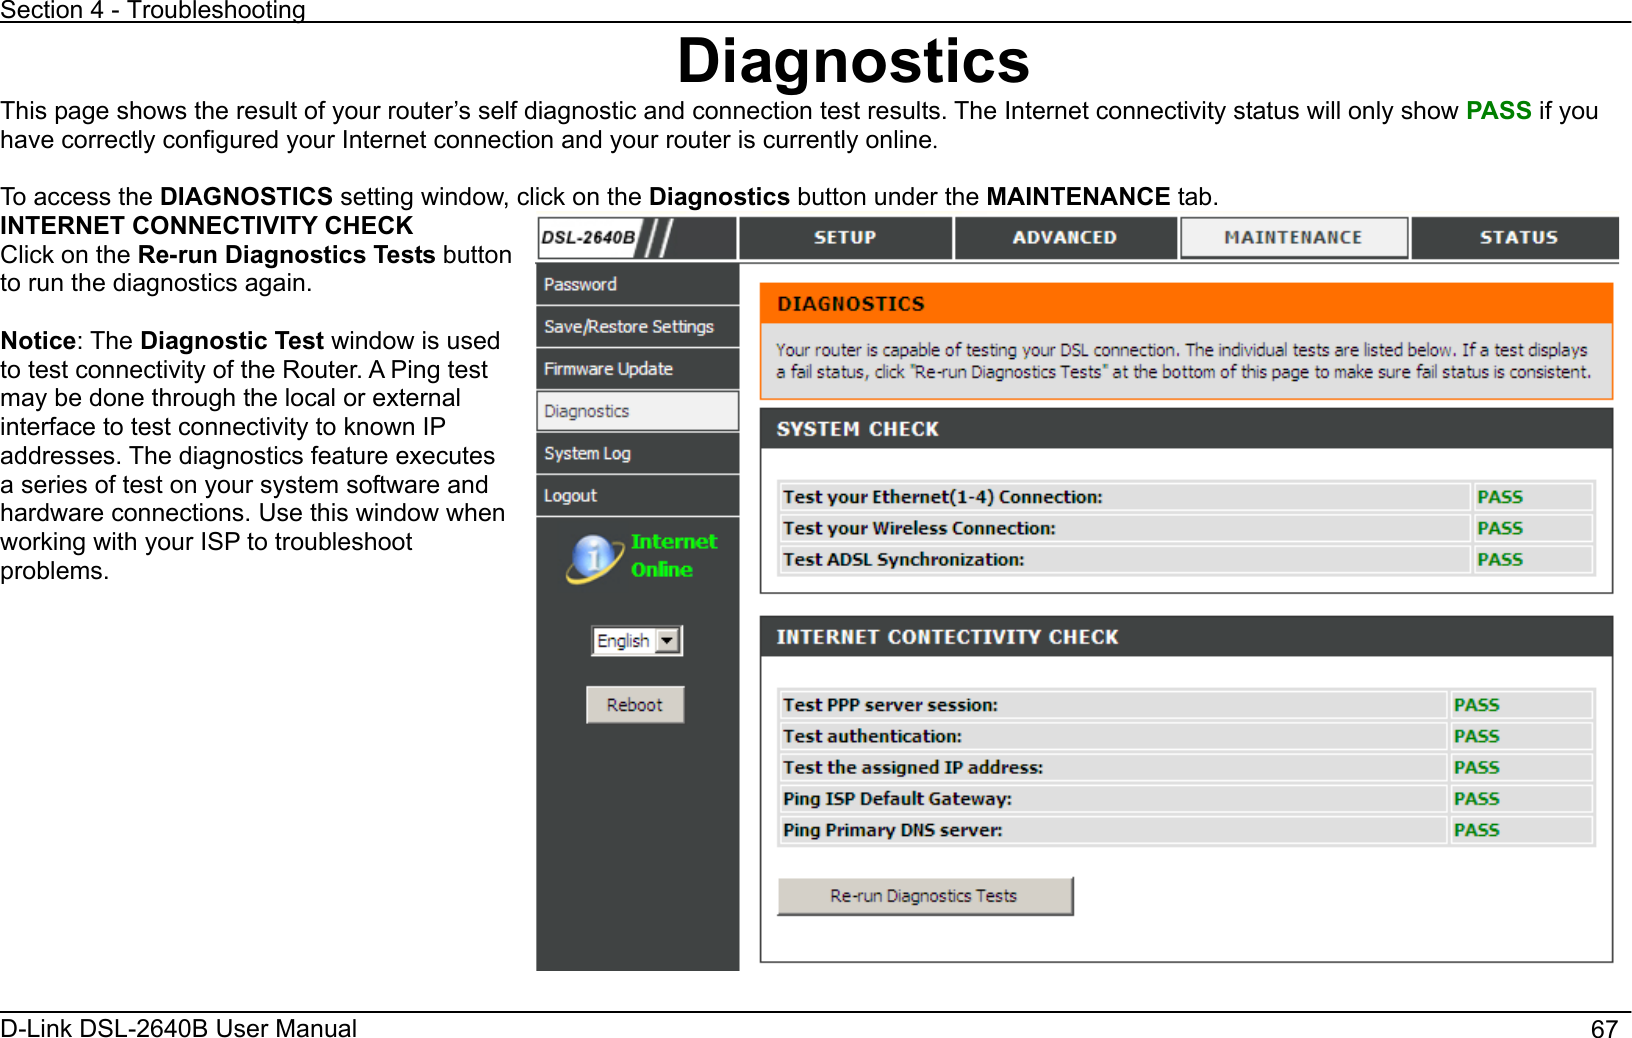 Section 4 - Troubleshooting D-Link DSL-2640B User Manual                                       67DiagnosticsThis page shows the result of your router’s self diagnostic and connection test results. The Internet connectivity status will only show PASS if you have correctly configured your Internet connection and your router is currently online.To access the DIAGNOSTICS setting window, click on the Diagnostics button under the MAINTENANCE tab. INTERNET CONNECTIVITY CHECK Click on the Re-run Diagnostics Tests button to run the diagnostics again.   Notice: The Diagnostic Test window is used to test connectivity of the Router. A Ping test may be done through the local or external interface to test connectivity to known IP addresses. The diagnostics feature executes a series of test on your system software and hardware connections. Use this window when working with your ISP to troubleshoot problems.